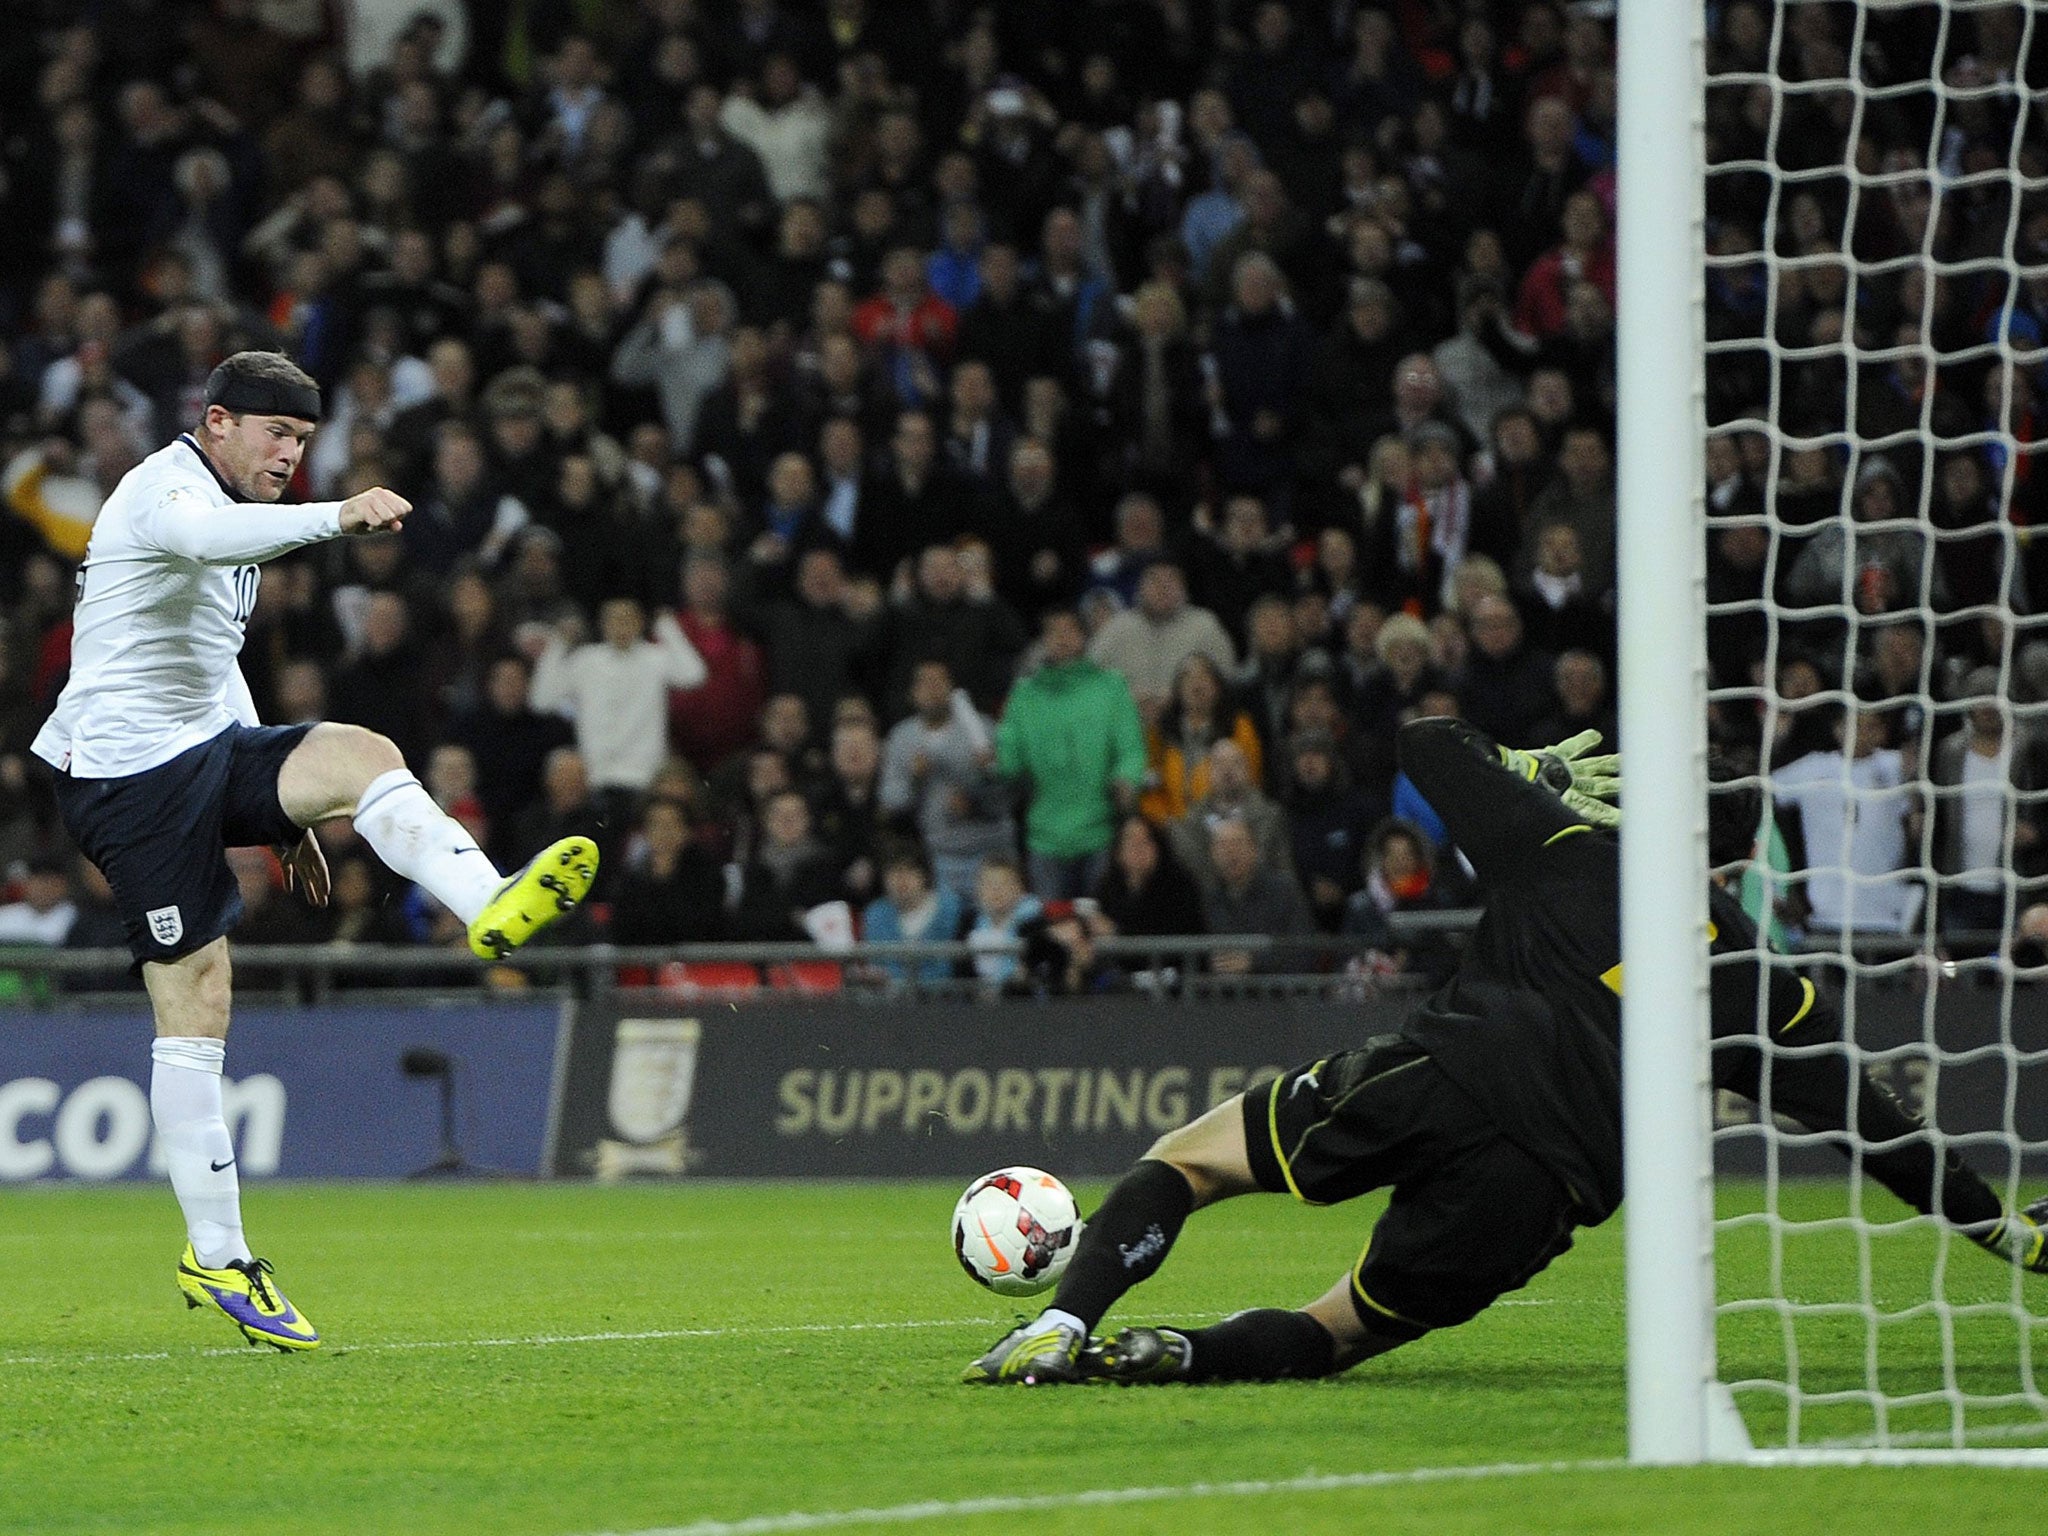 Wayne Rooney opens the scoring for England at Wembley